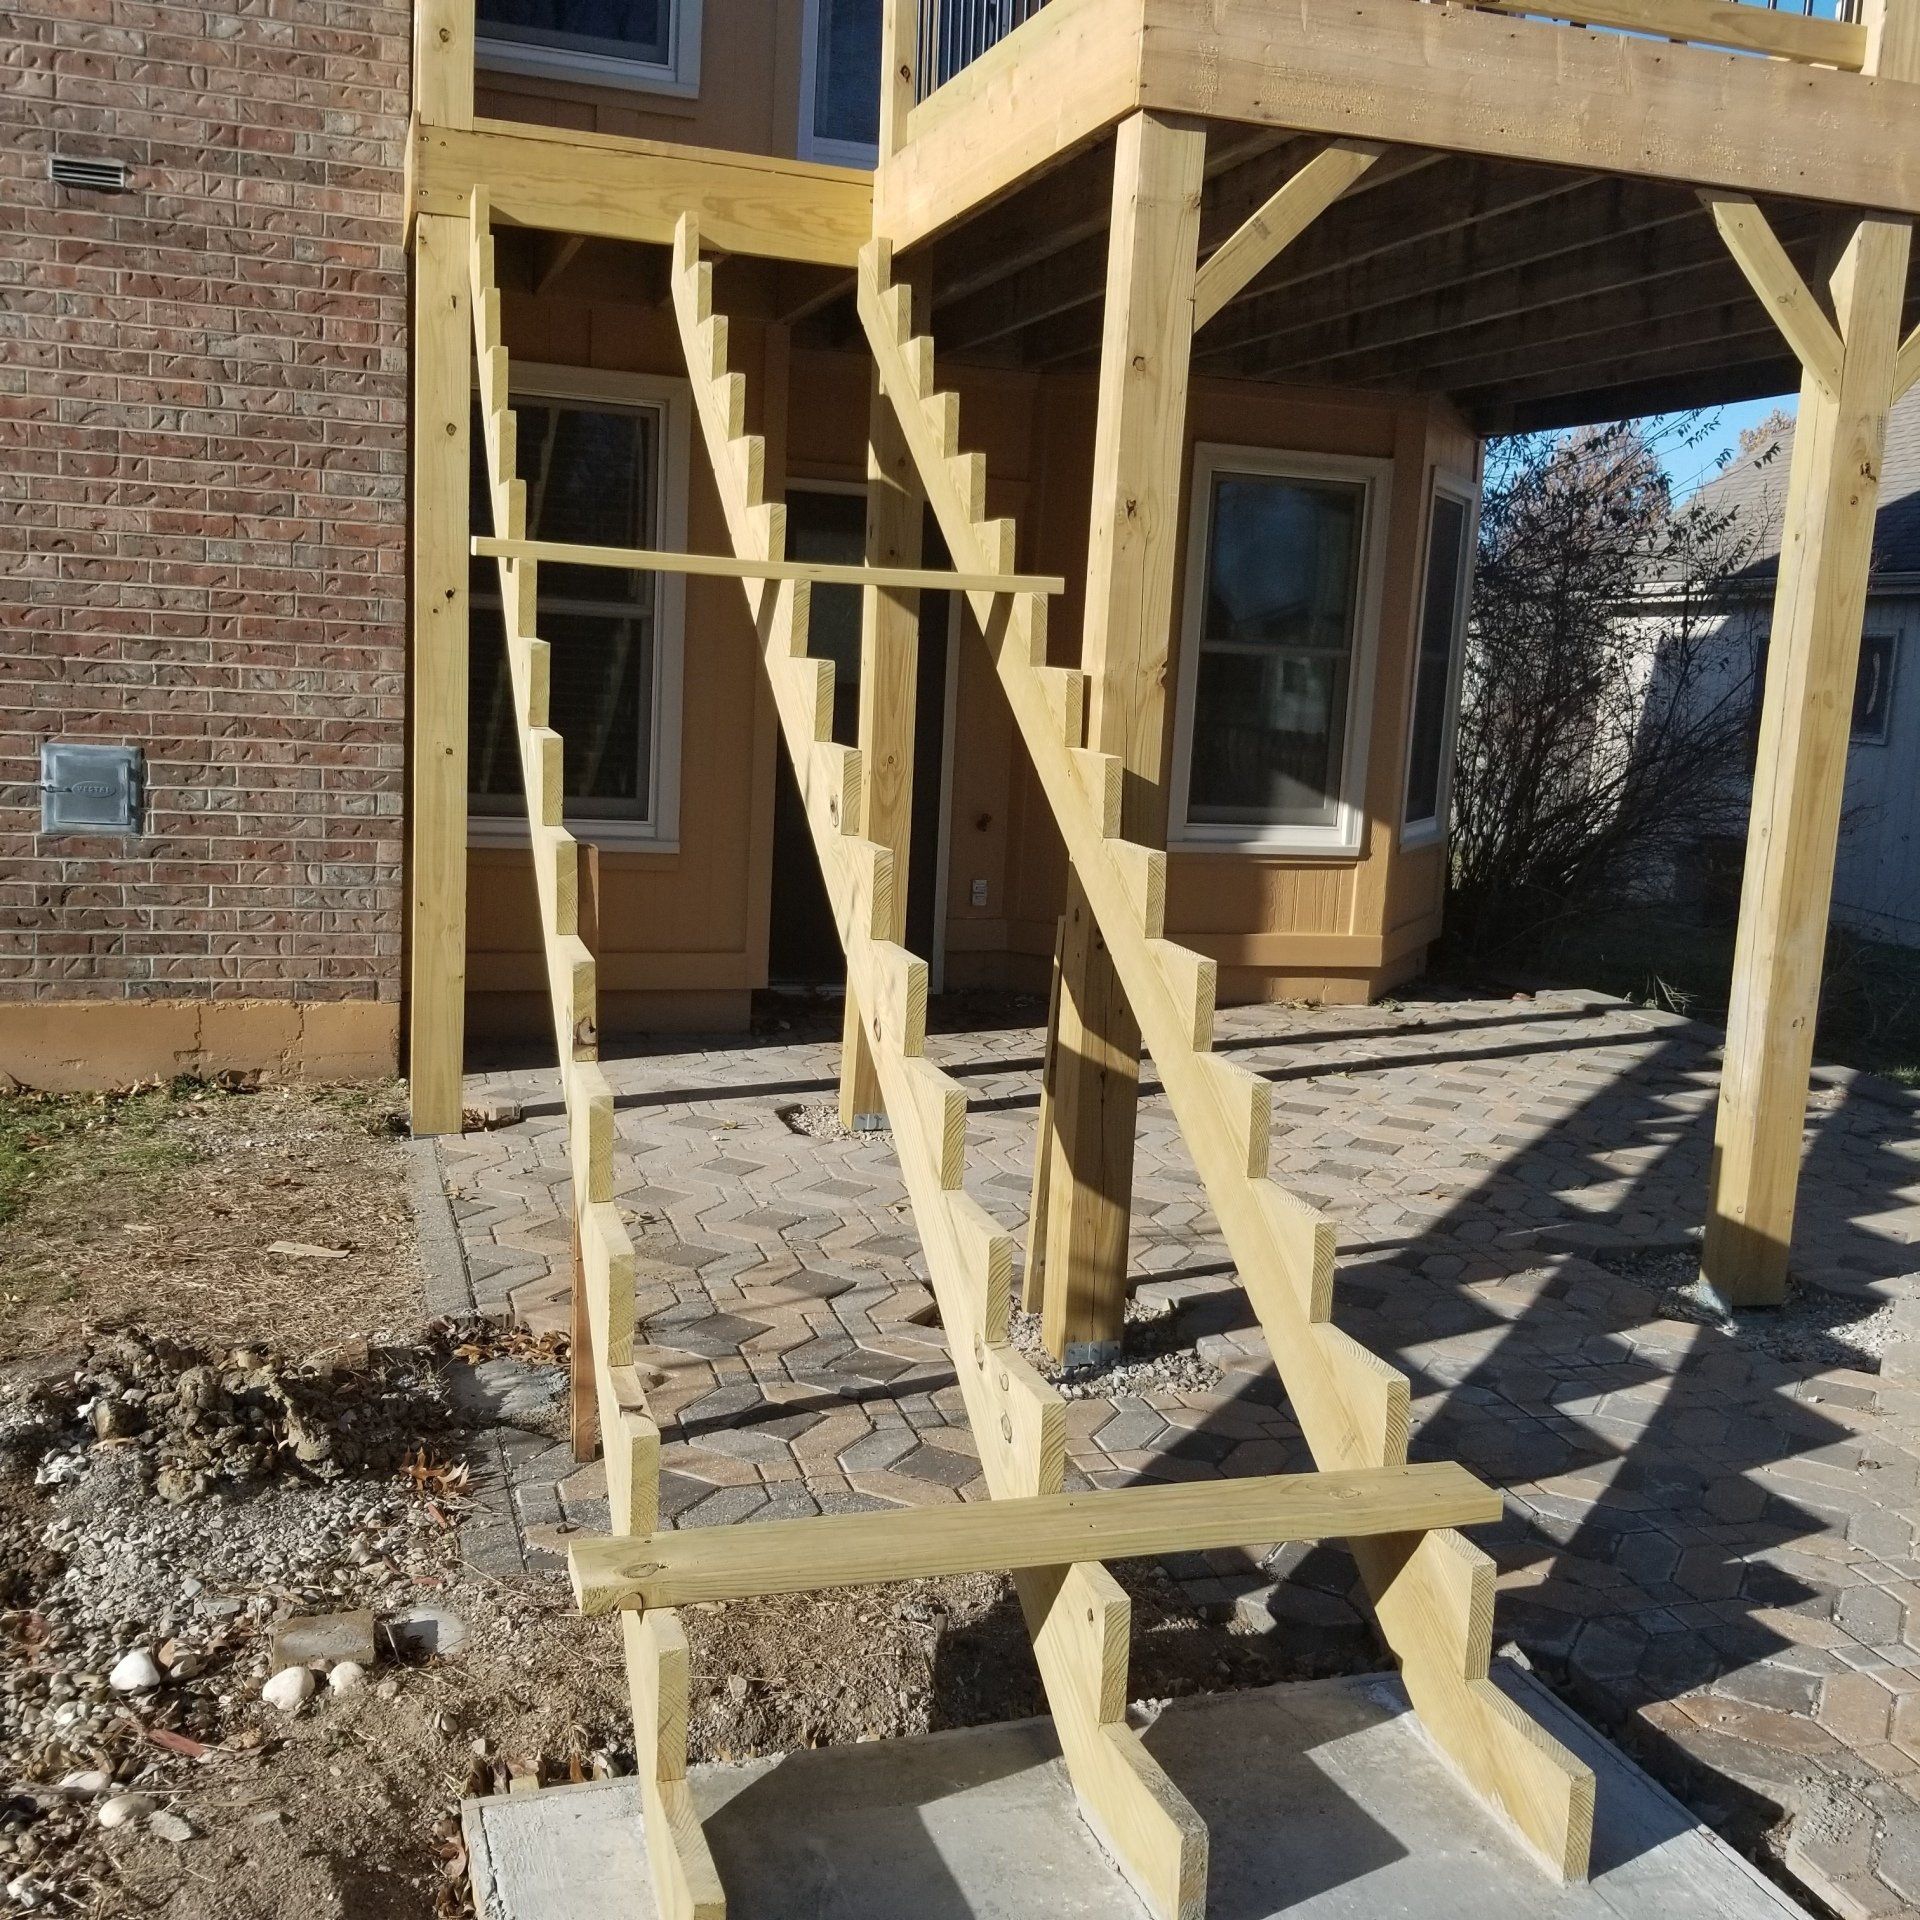 New back deck with framing for stairs ready to be completed